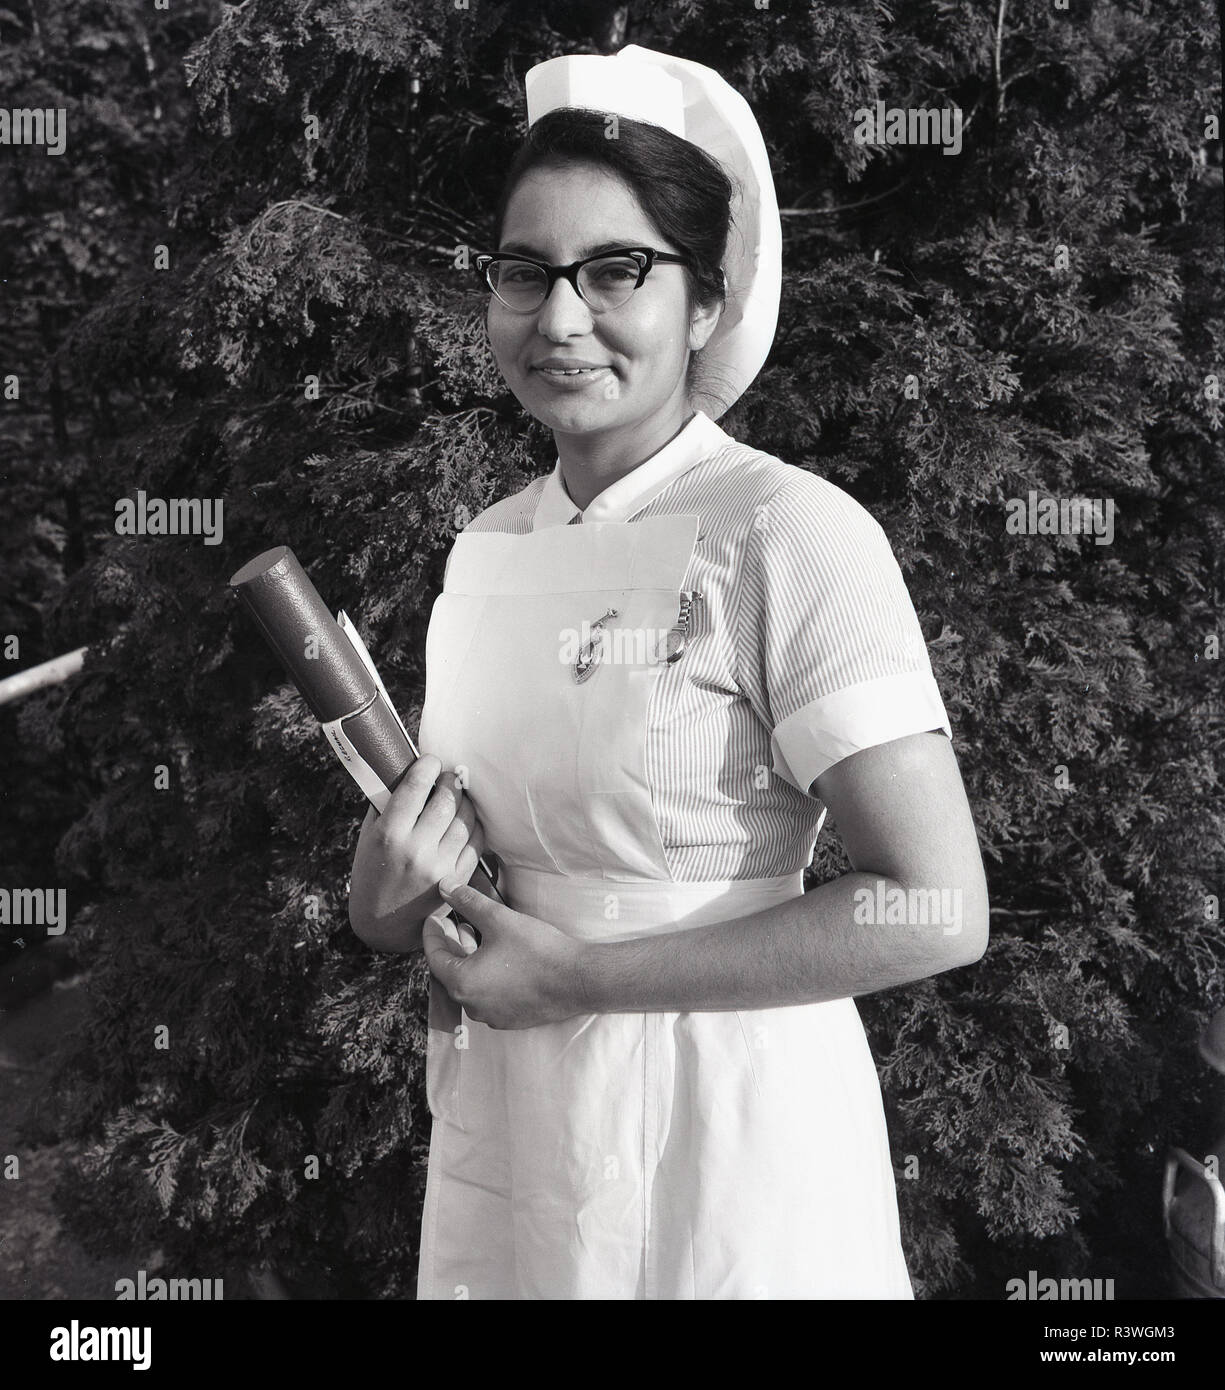 1965, Britain, NHS,a proud overseas nurse from the Indian subcontinent standing outside in her uniform holding her British Royal College of Nursiing (RCN) qualifications and wearing a fob watch and nursing qualification badge, England, UK. Stock Photo